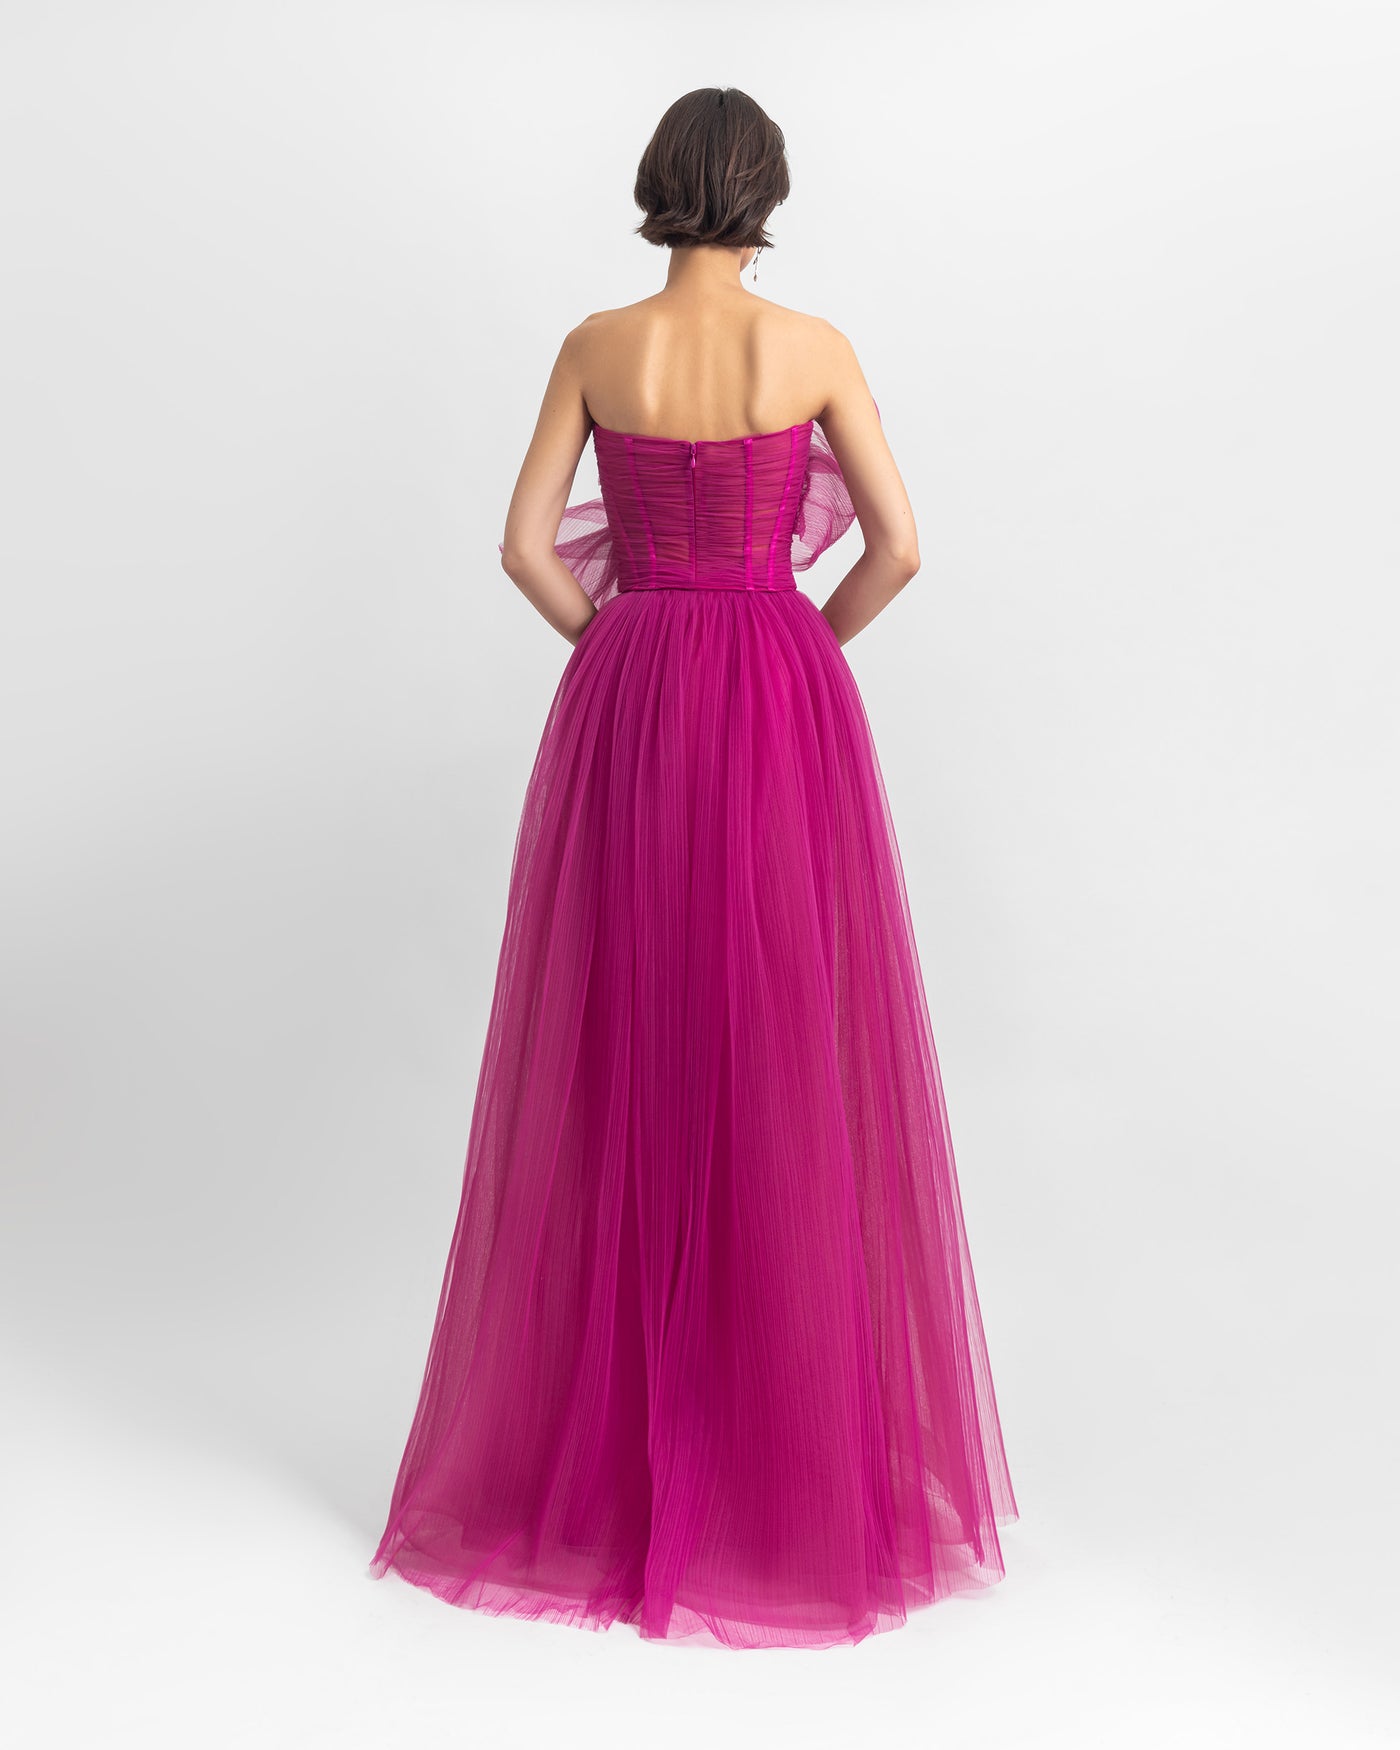 Bow-Like Tulle Dress